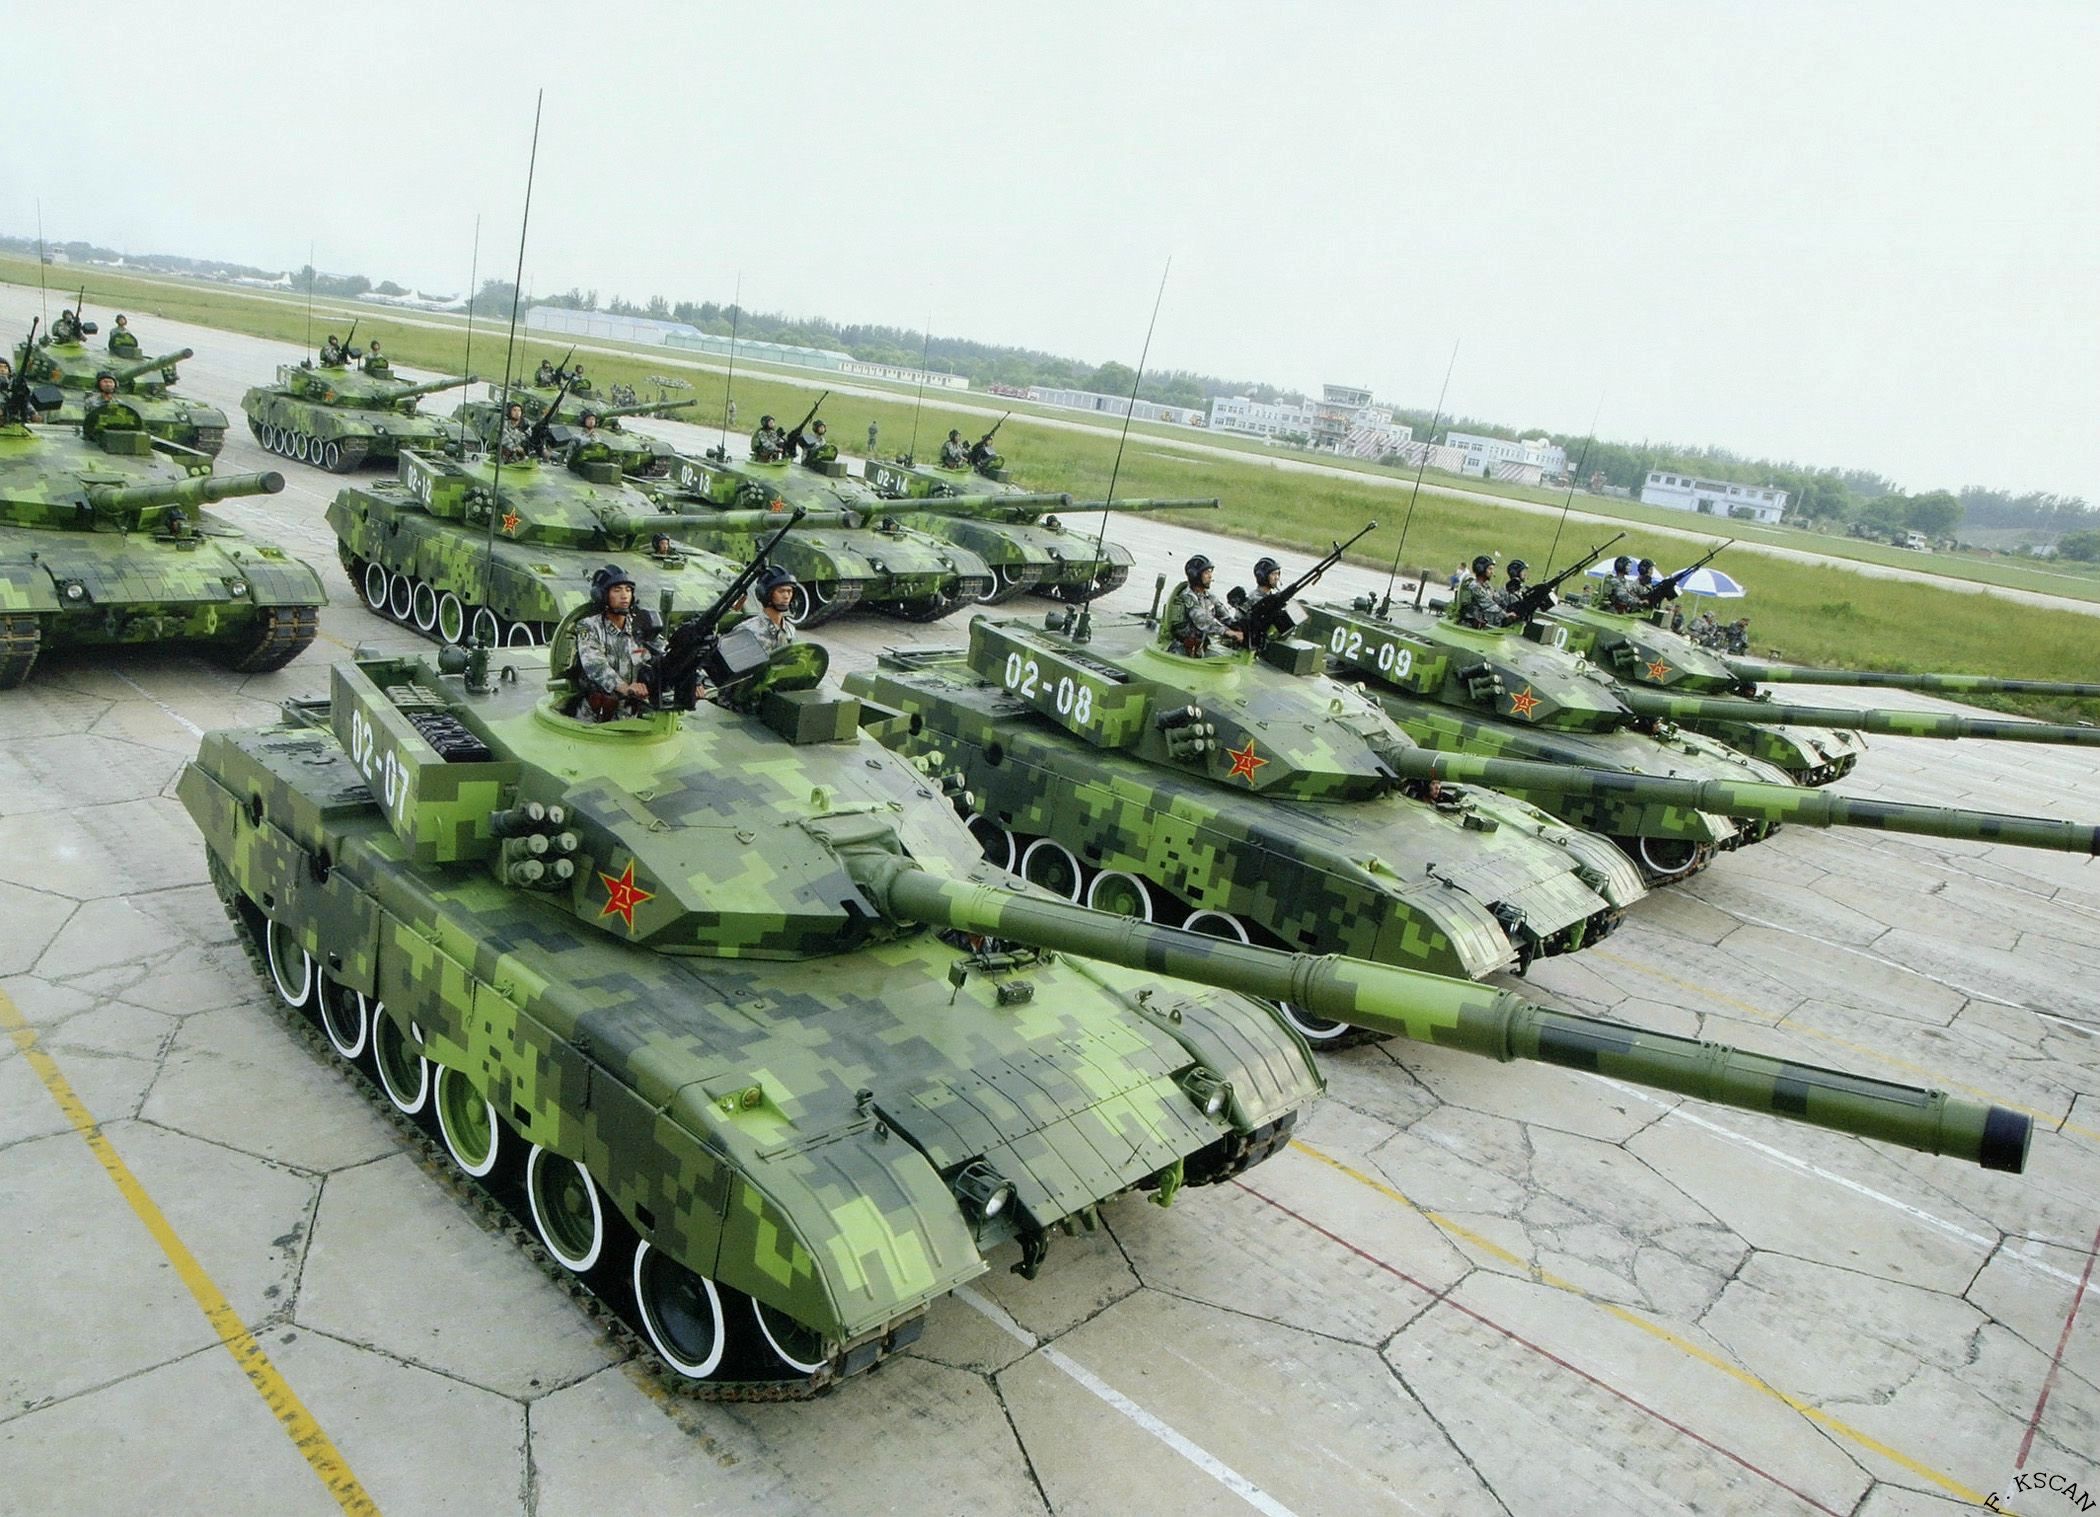 Type 96A main battle tanks of the Chinese People's Liberation Army (PLA)  Ground Force [2100 x 1517] : reddit.com